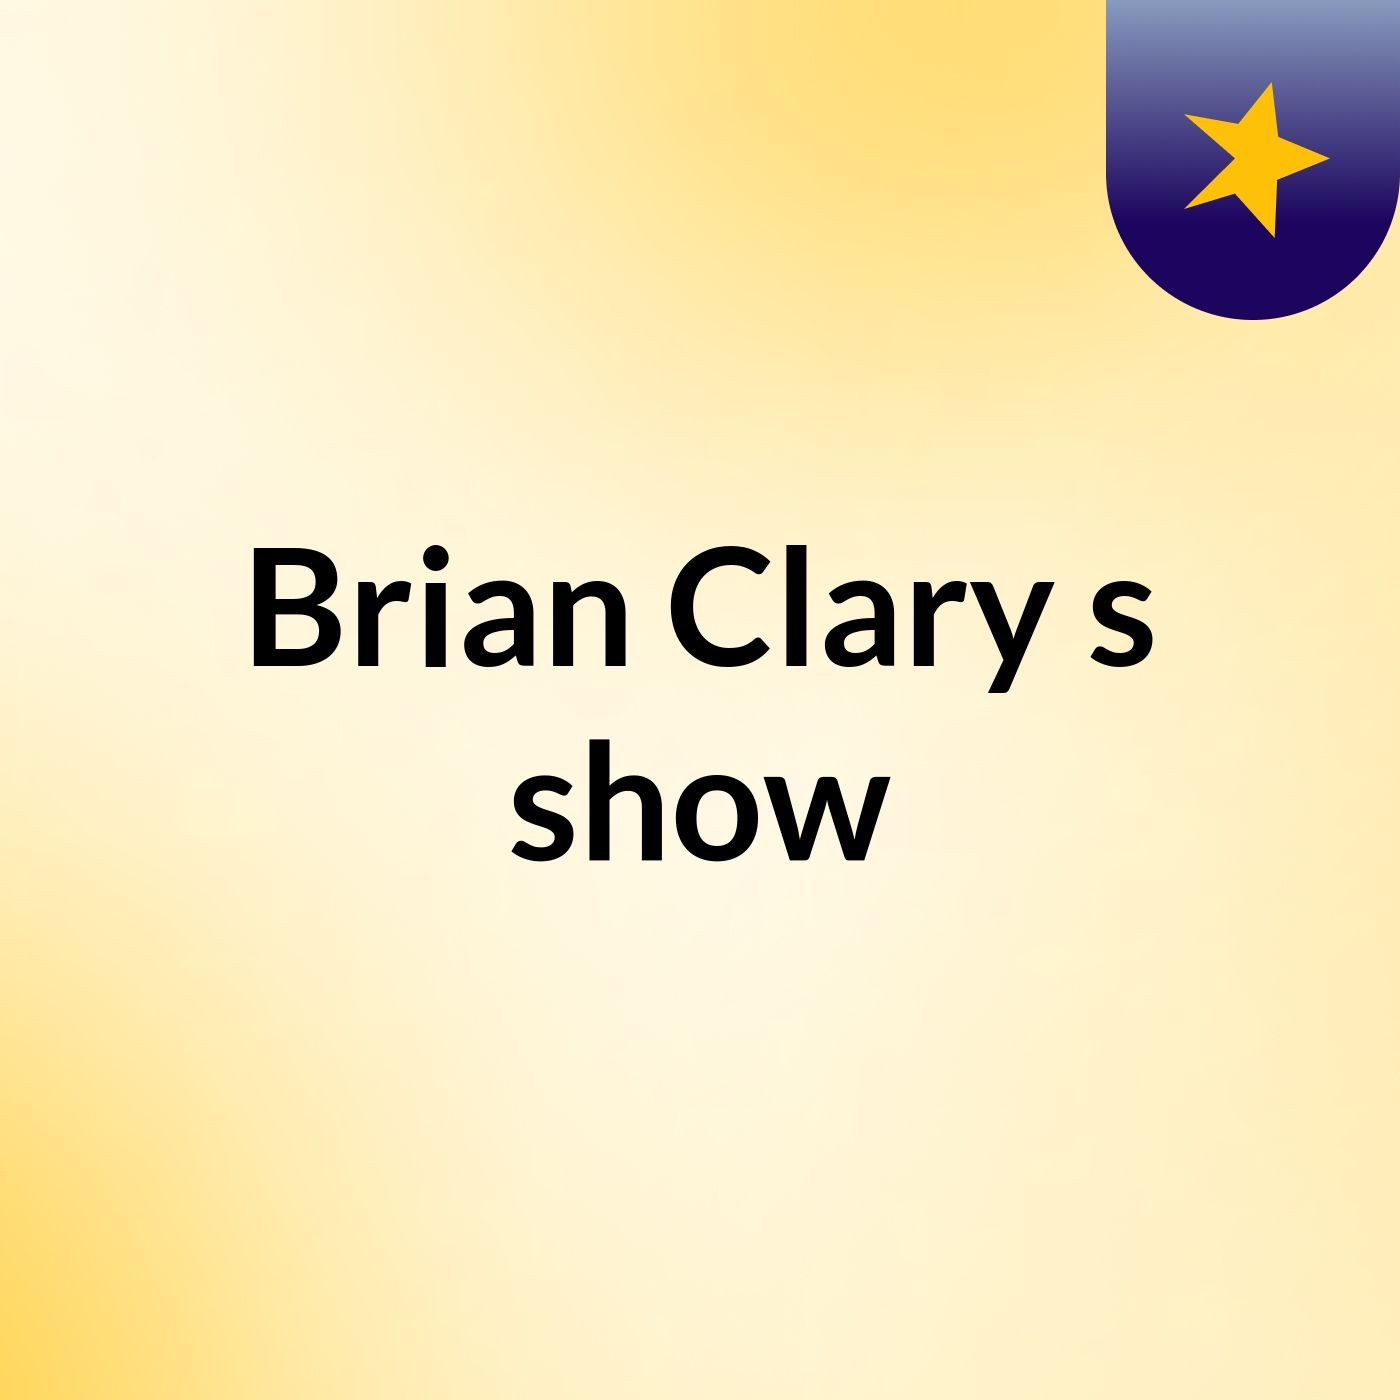 Brian Clary's show